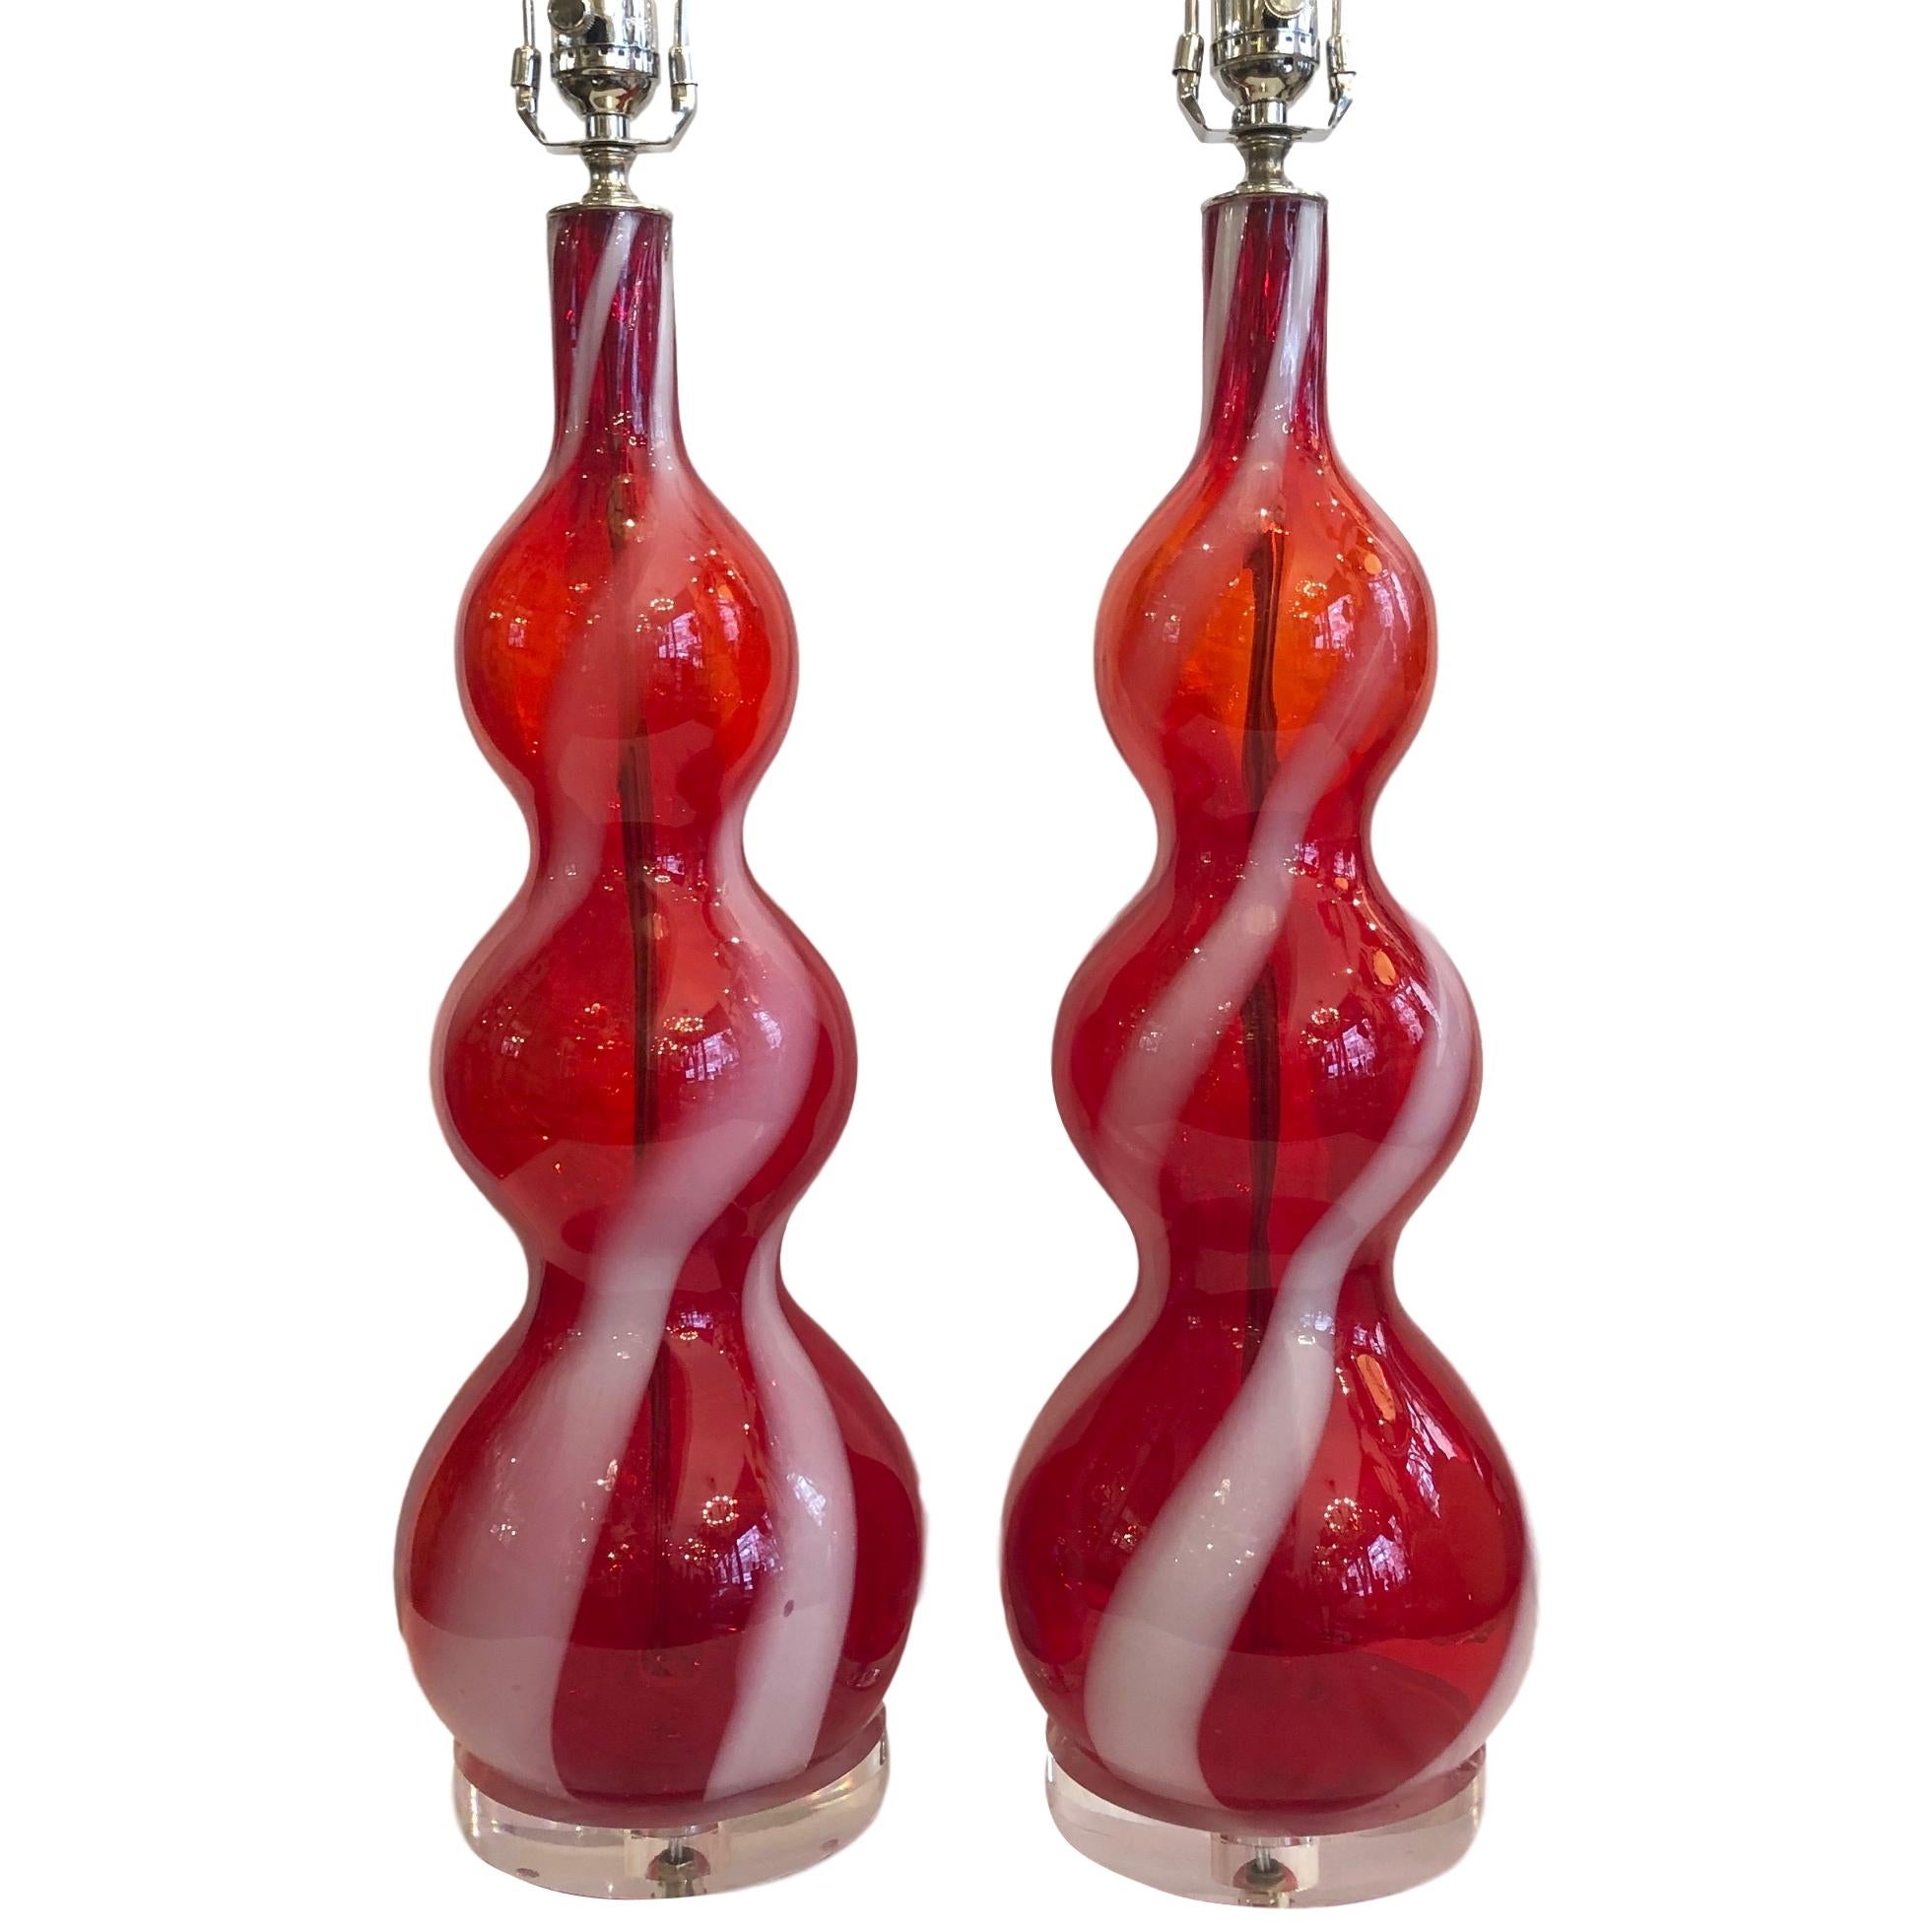 Pair of 1960s hand blown Murano lamps in red with white ribbons.

Measurements:
Height of body 22.5